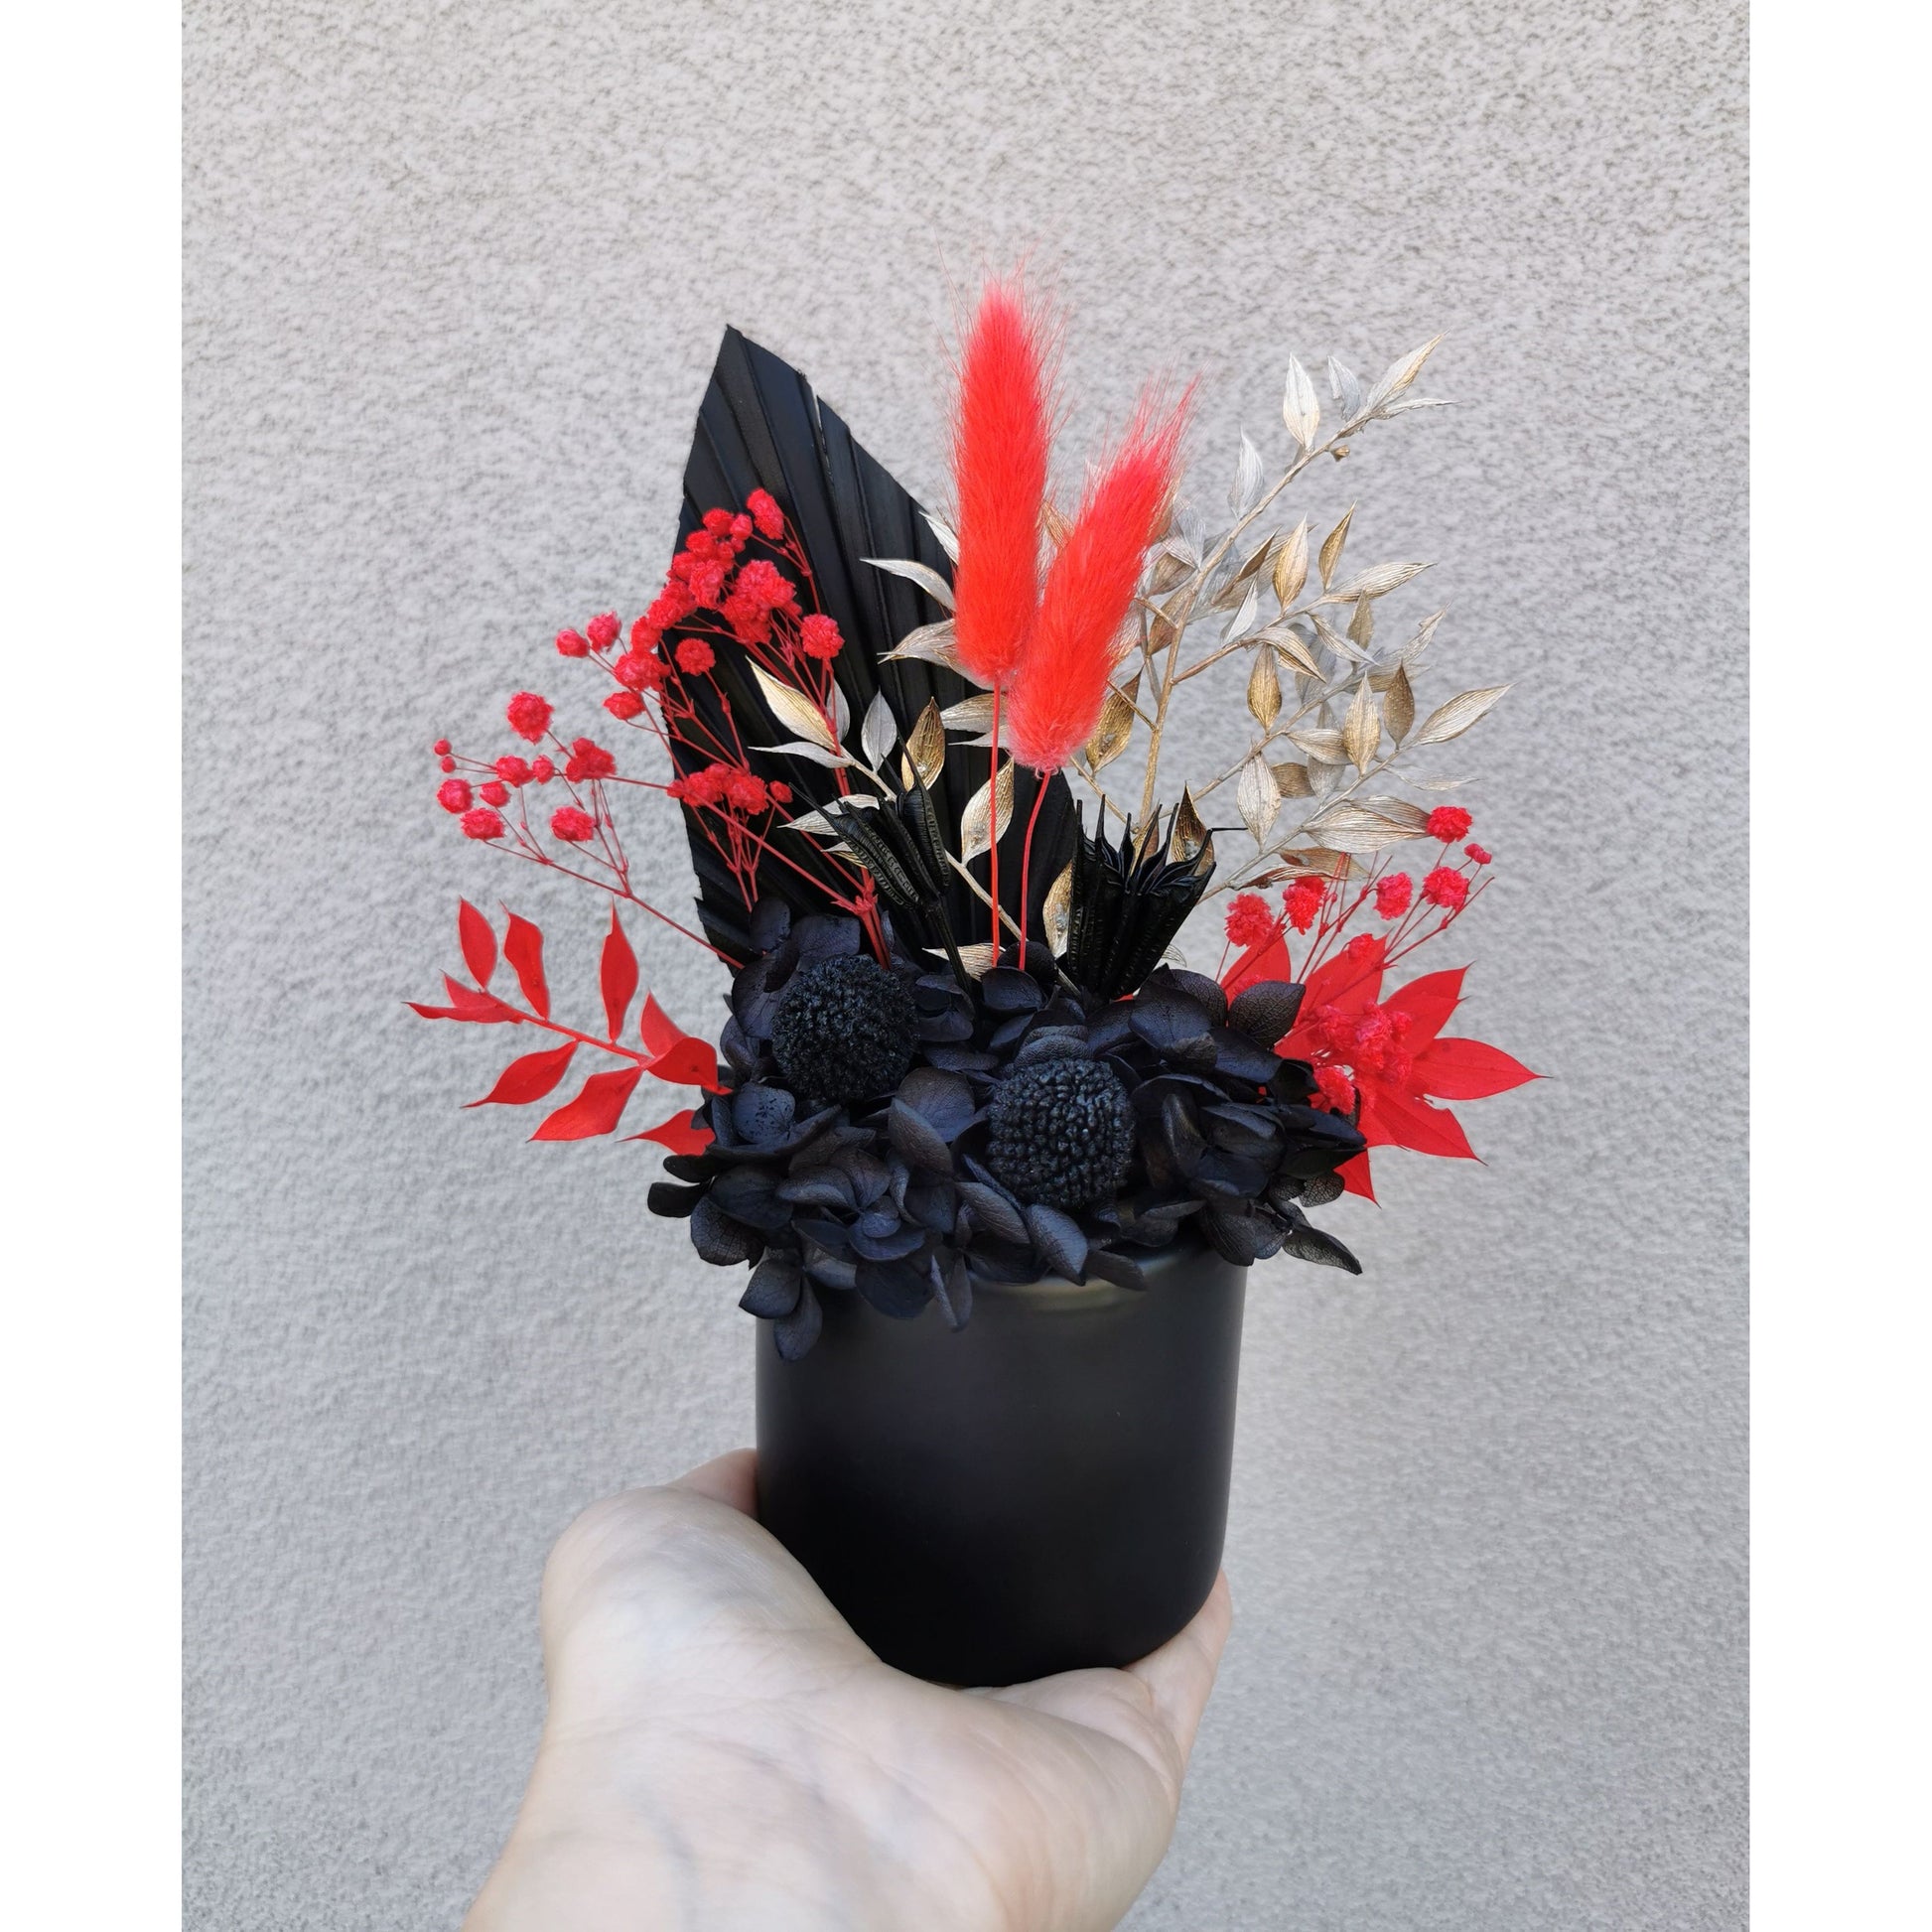 Red, black & gold dried & preserved flowers in black vase. Photo shows arrangement being held by hand against a blank wall